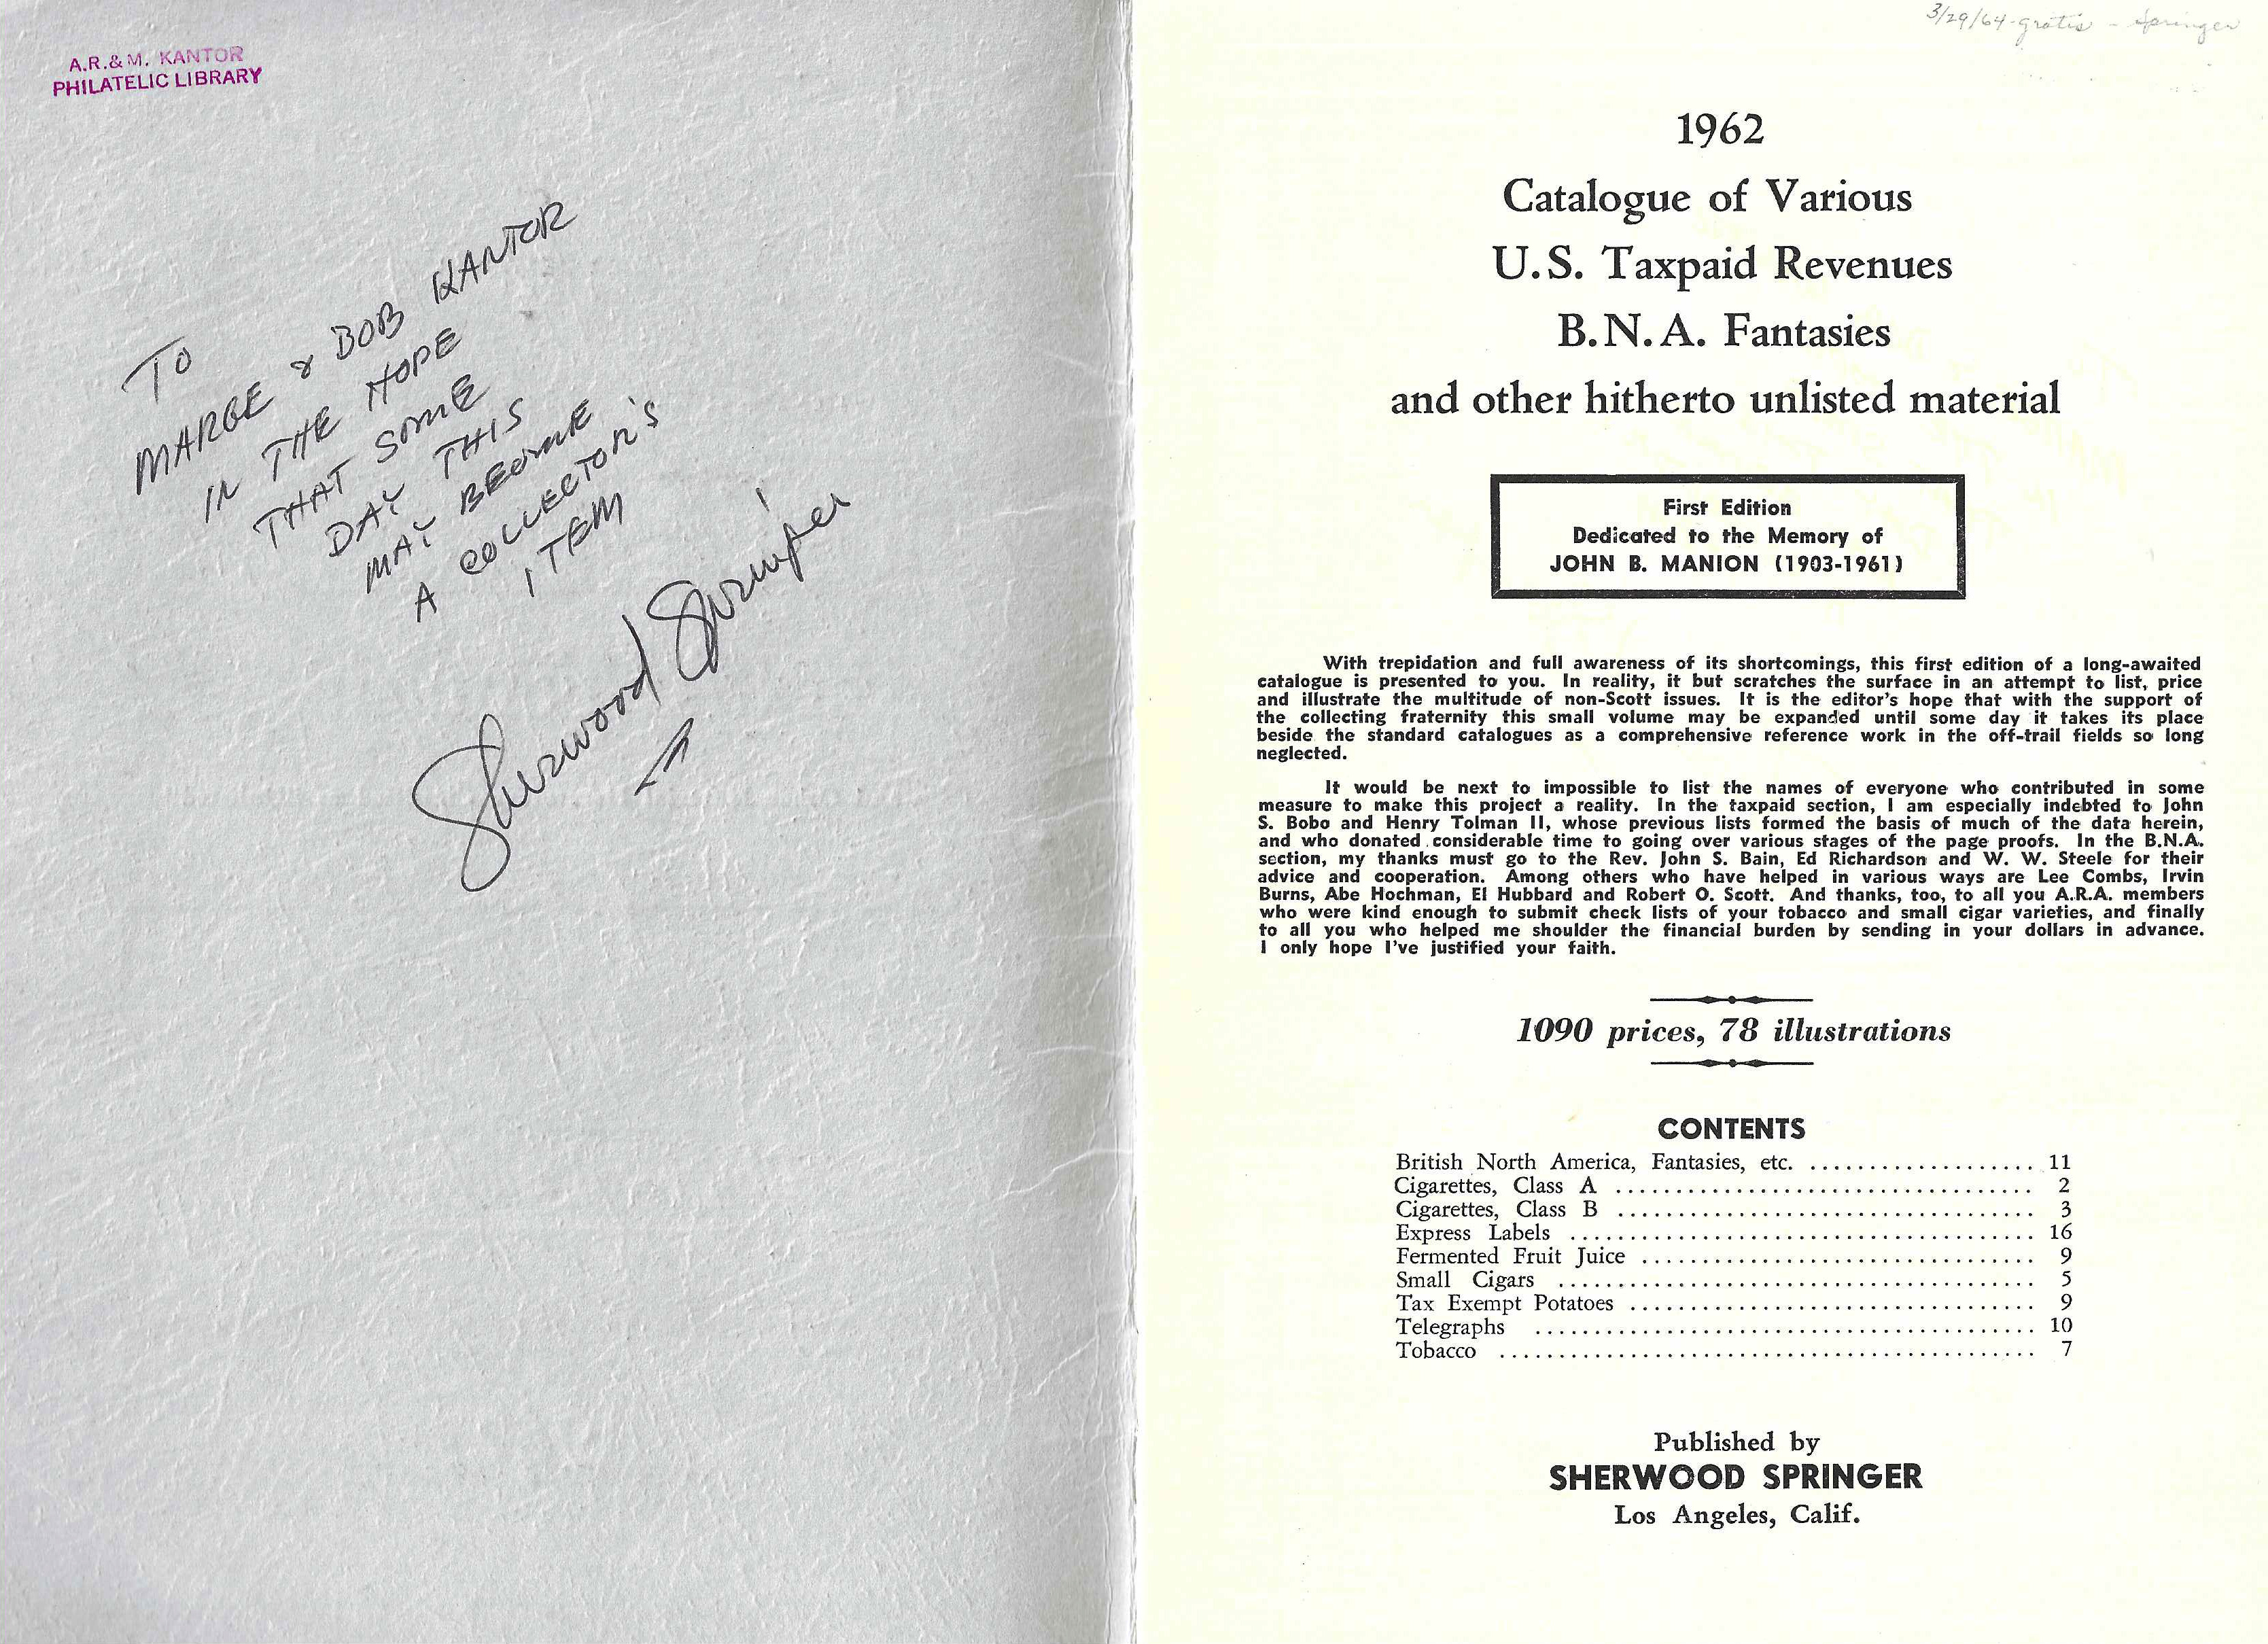 publication 1962 Springer's Catalog of Various U. S. Taxpaid Revenues authographed by author